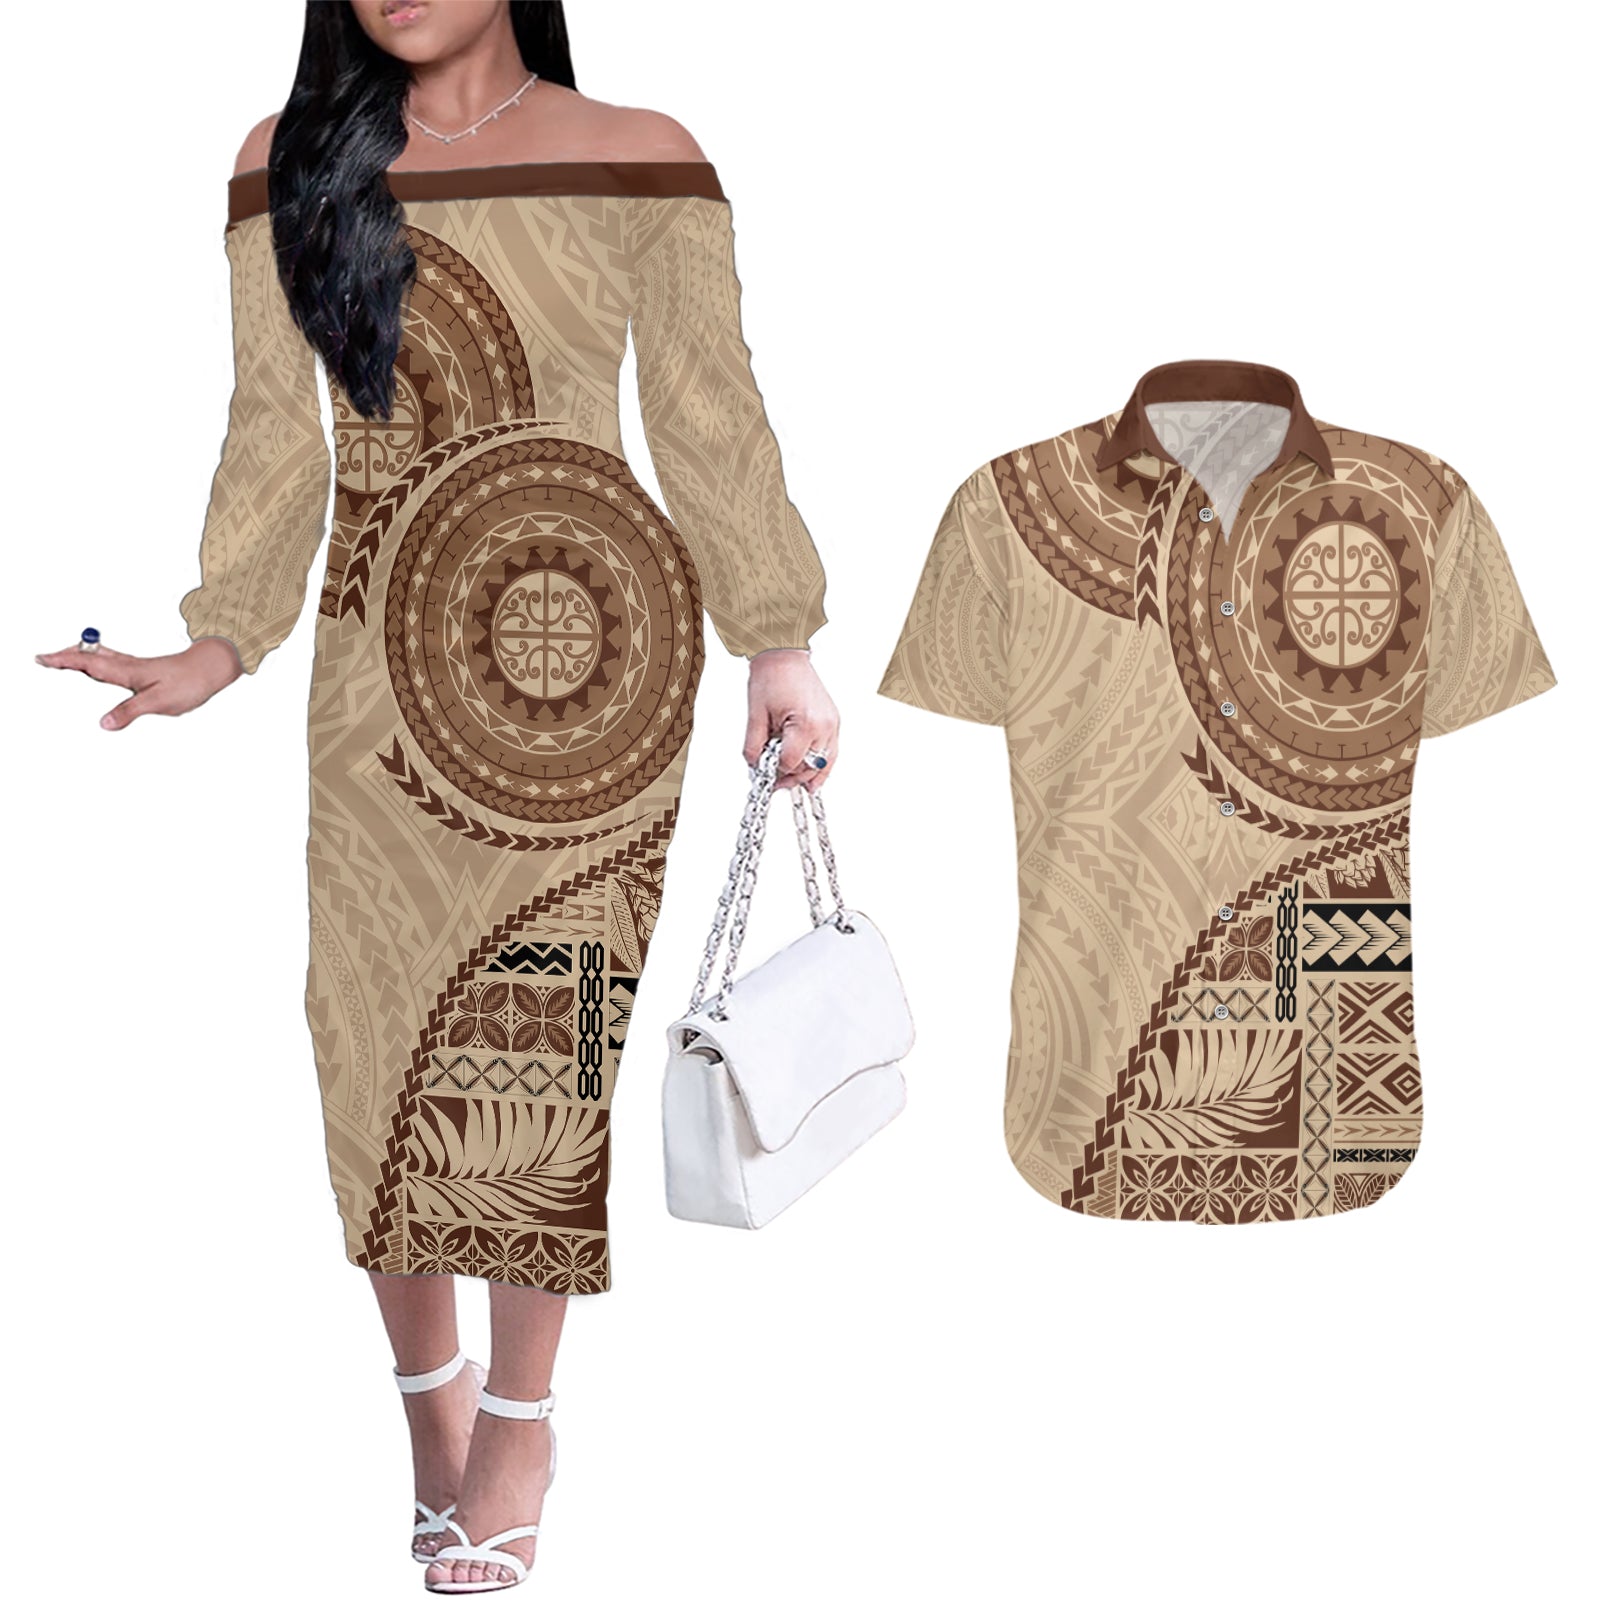 Samoa Siapo Pattern Simple Style Couples Matching Off The Shoulder Long Sleeve Dress and Hawaiian Shirt LT05 Brown - Polynesian Pride